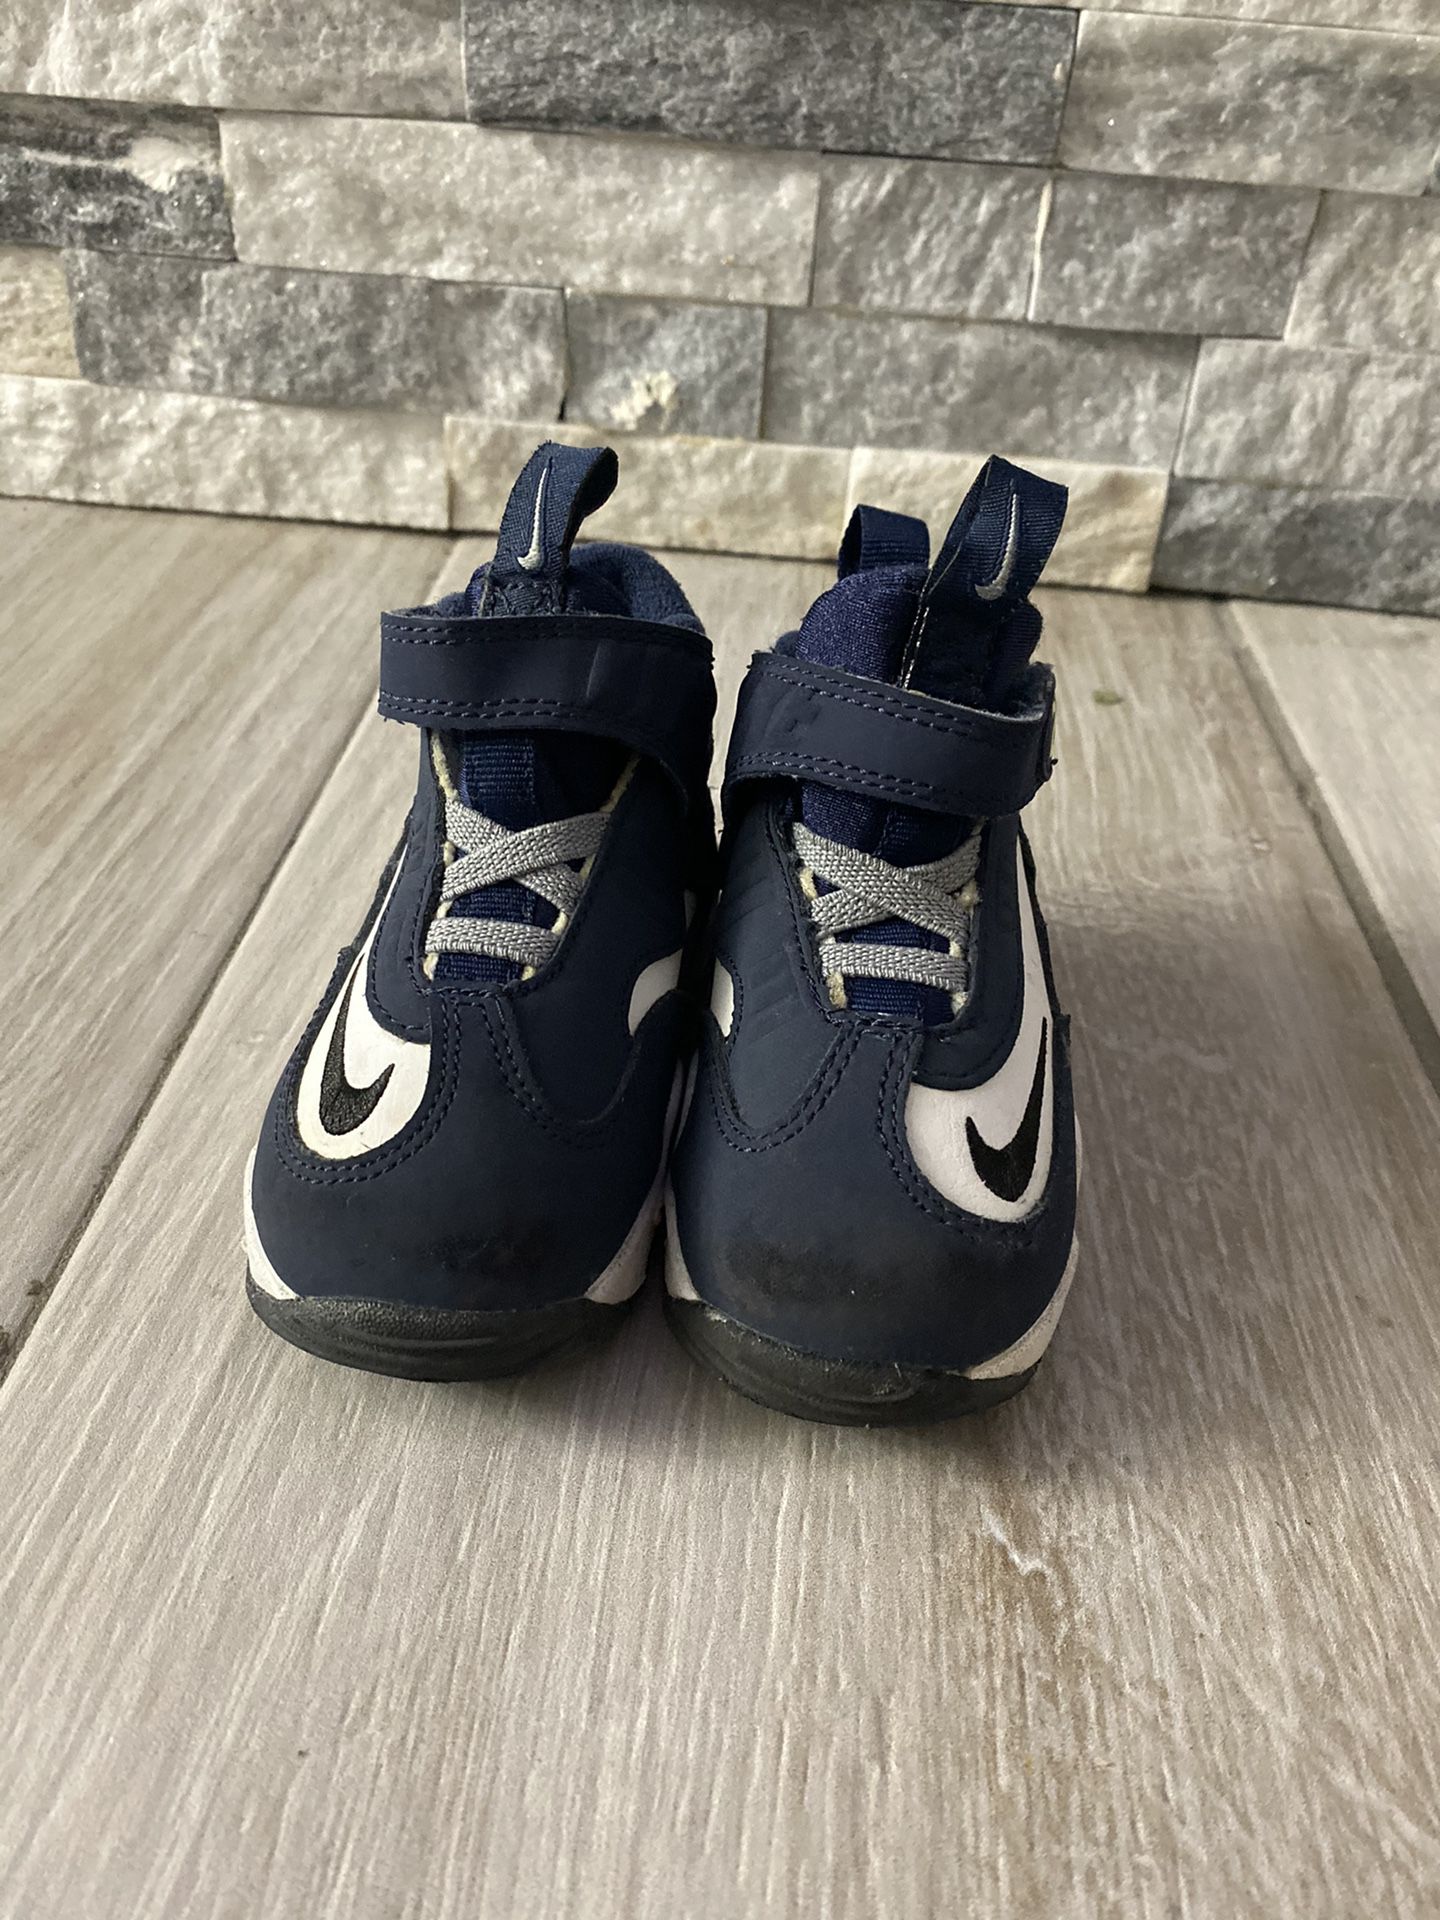 Nike air griffey shoes infant 4c